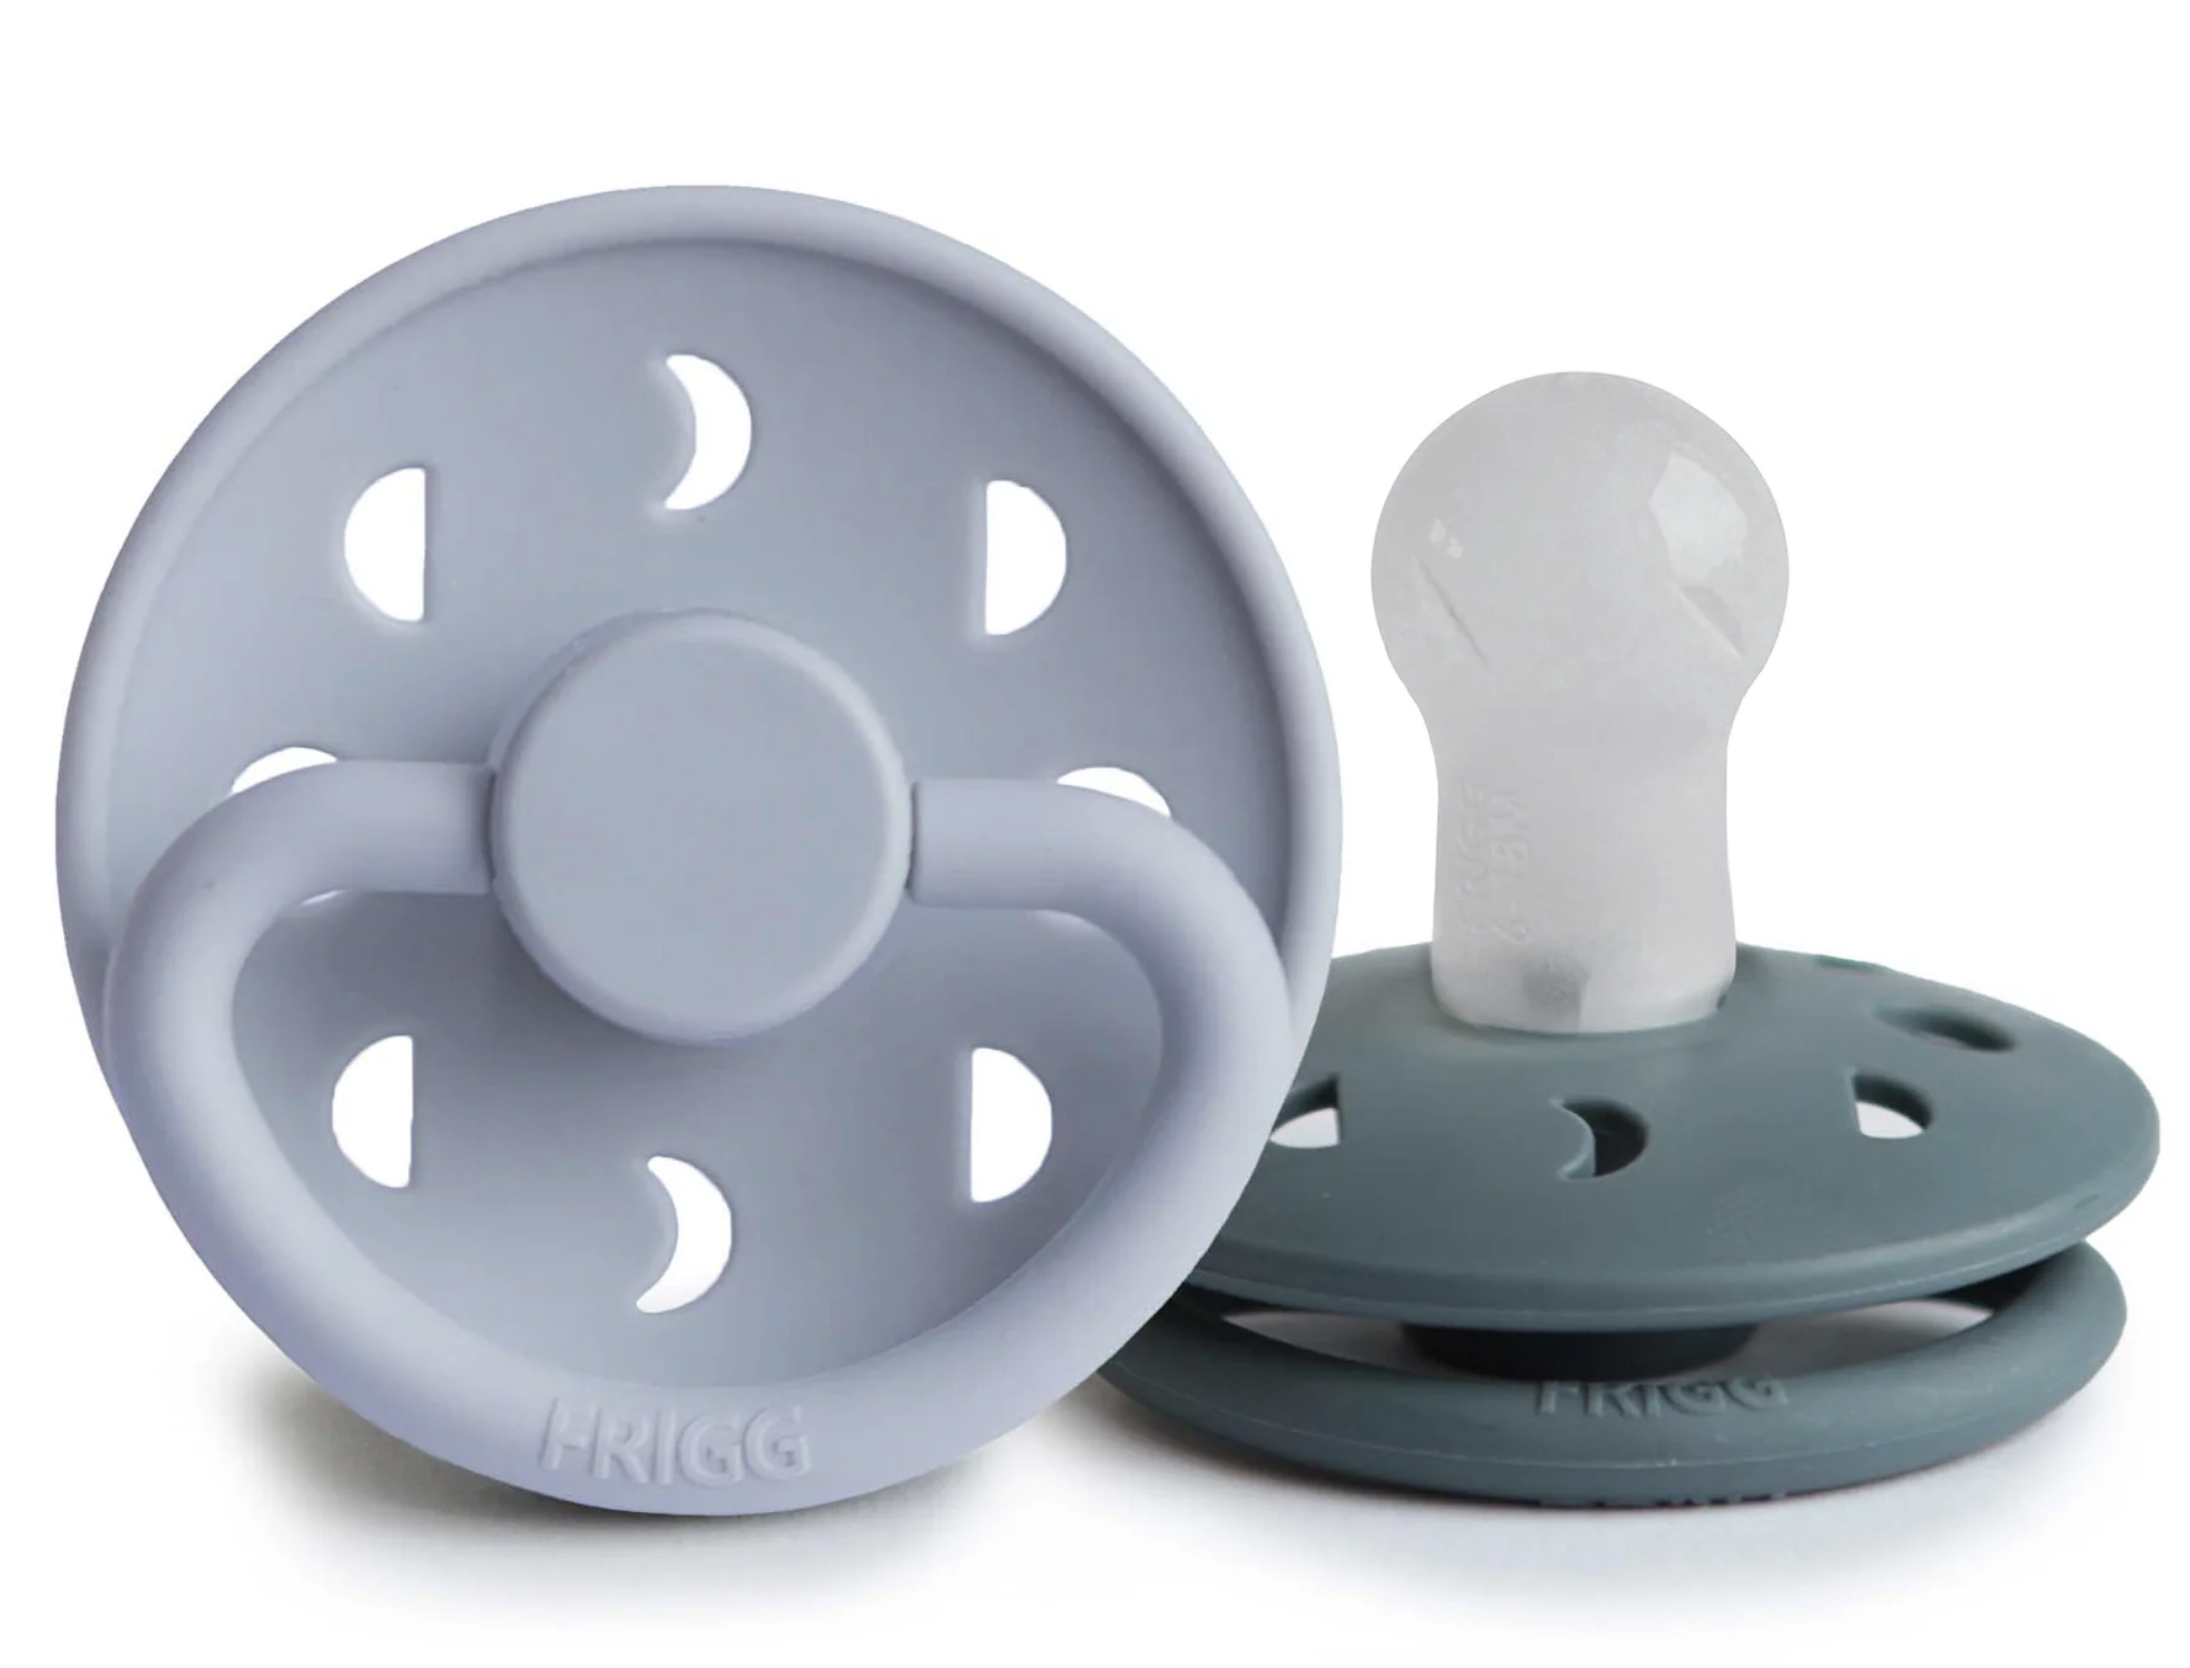 Frigg Moon Silicone Pacifier